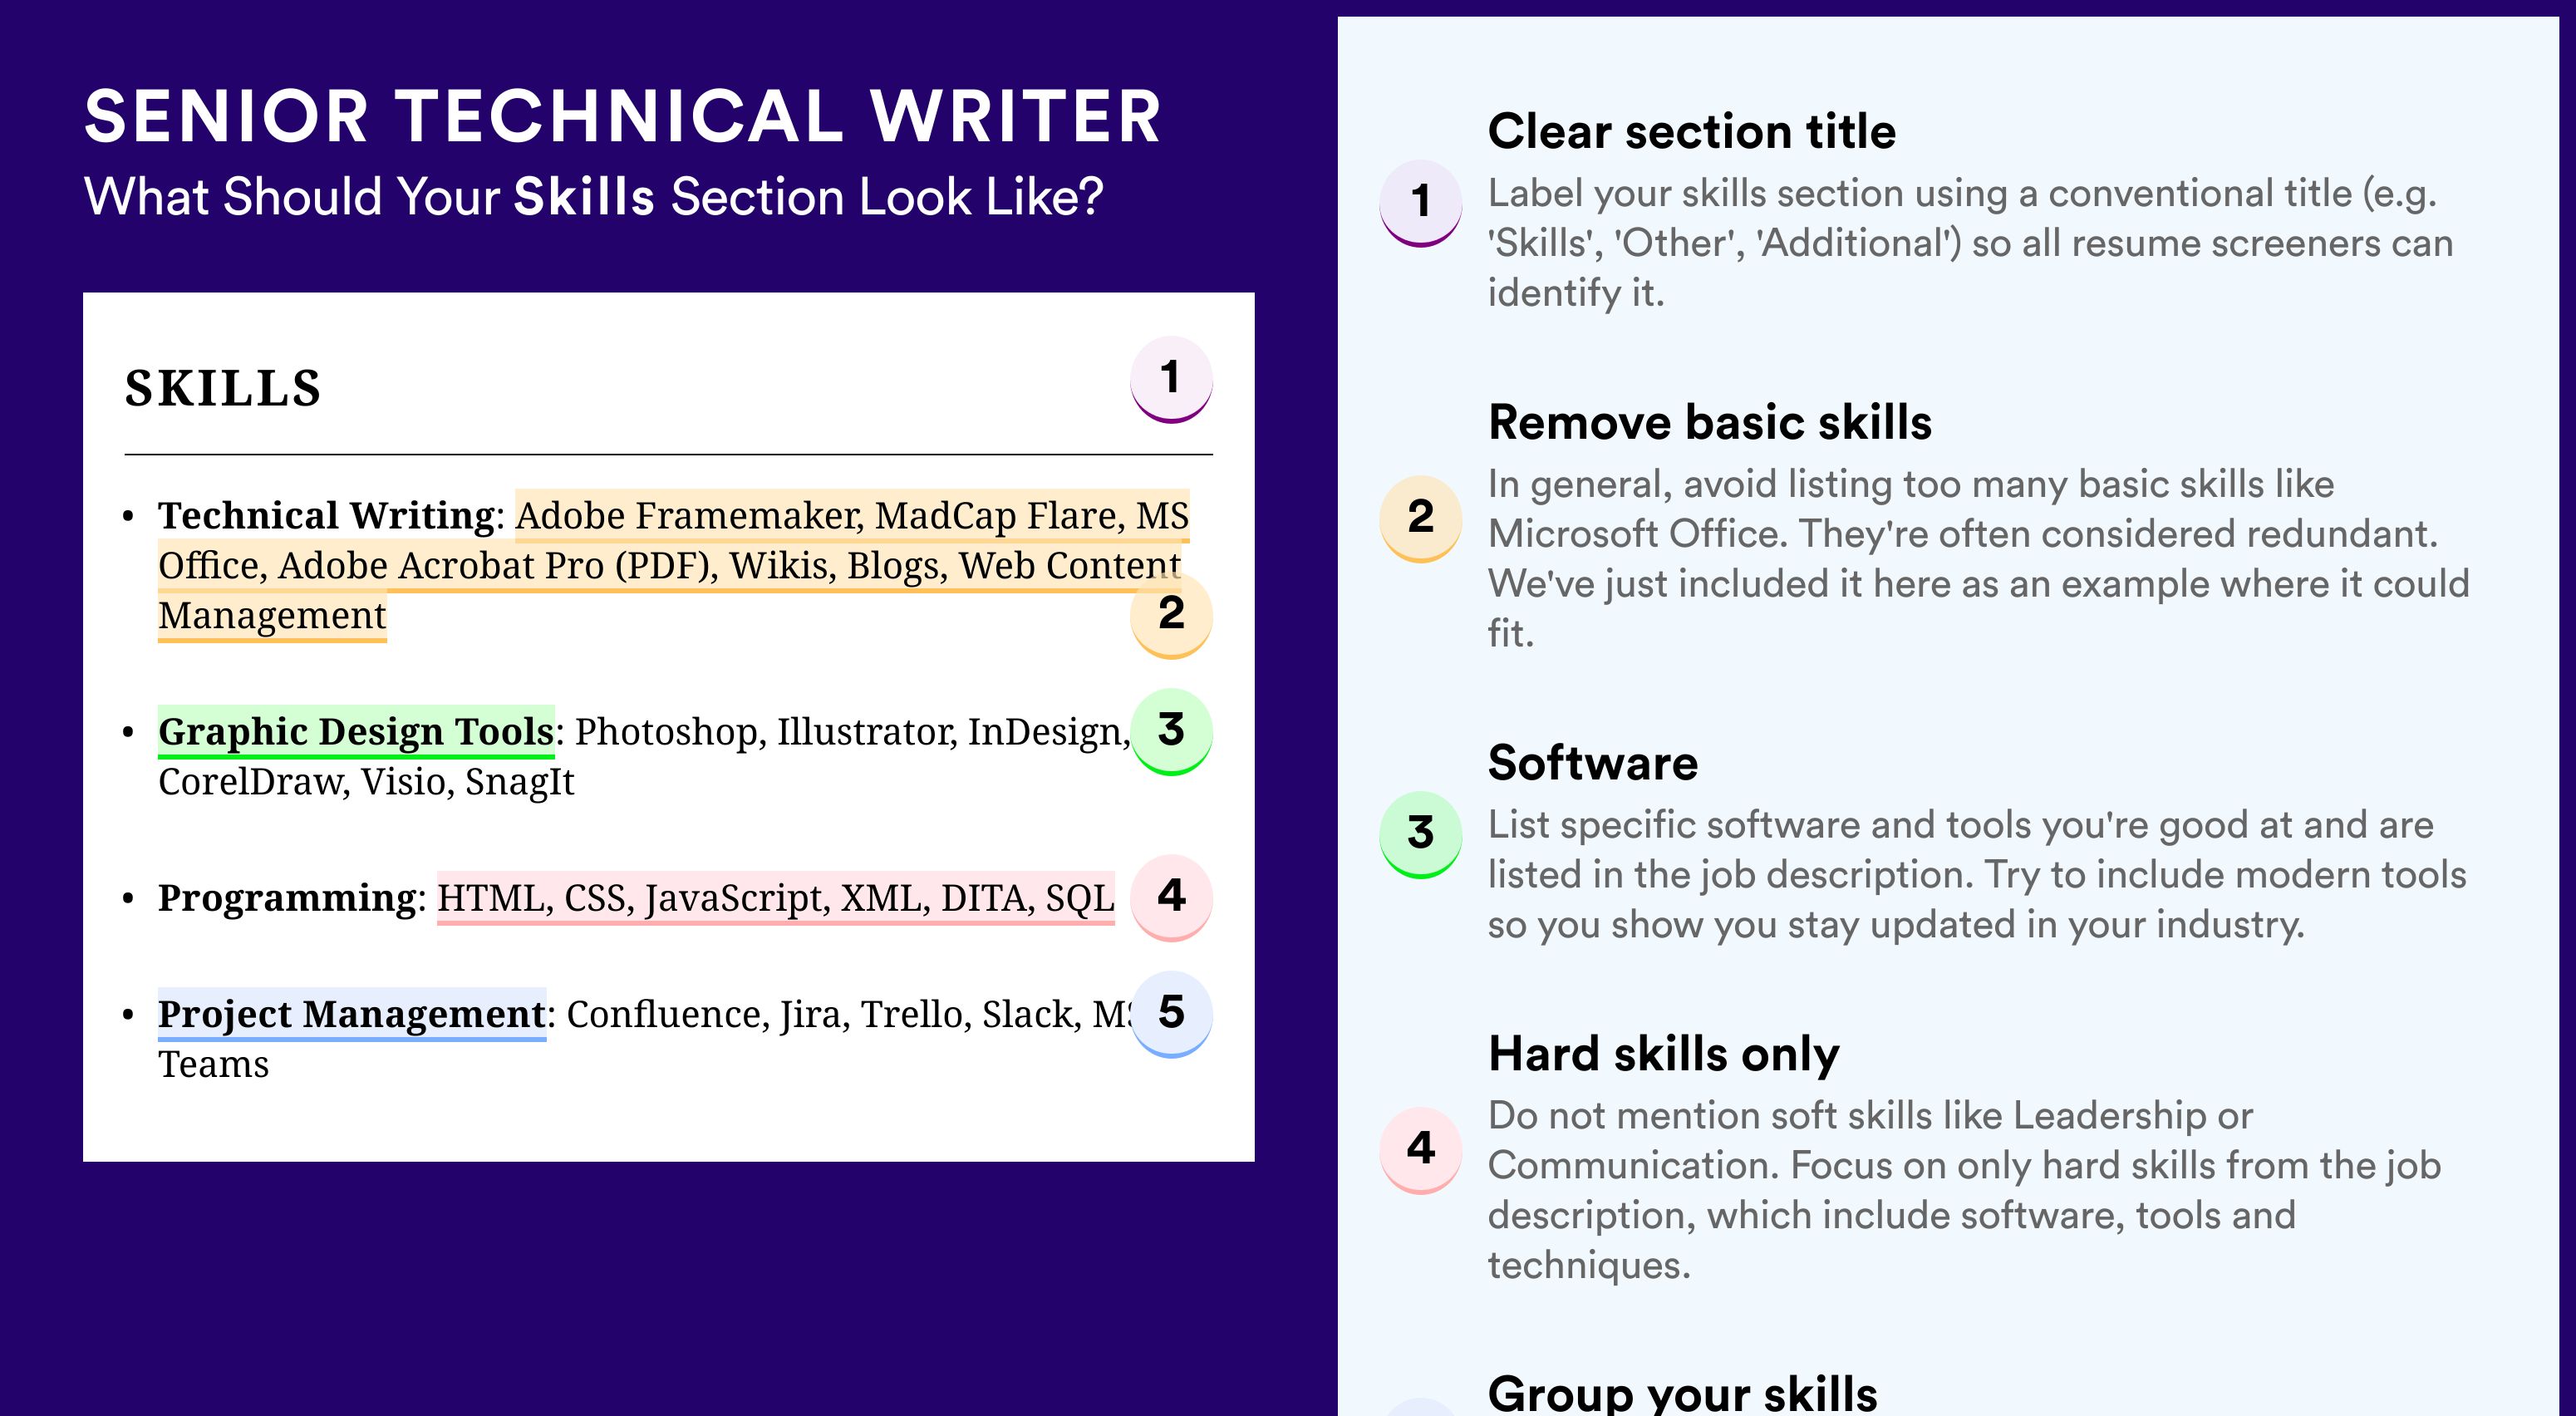 How To Write Your Skills Section - Senior Technical Writer Roles